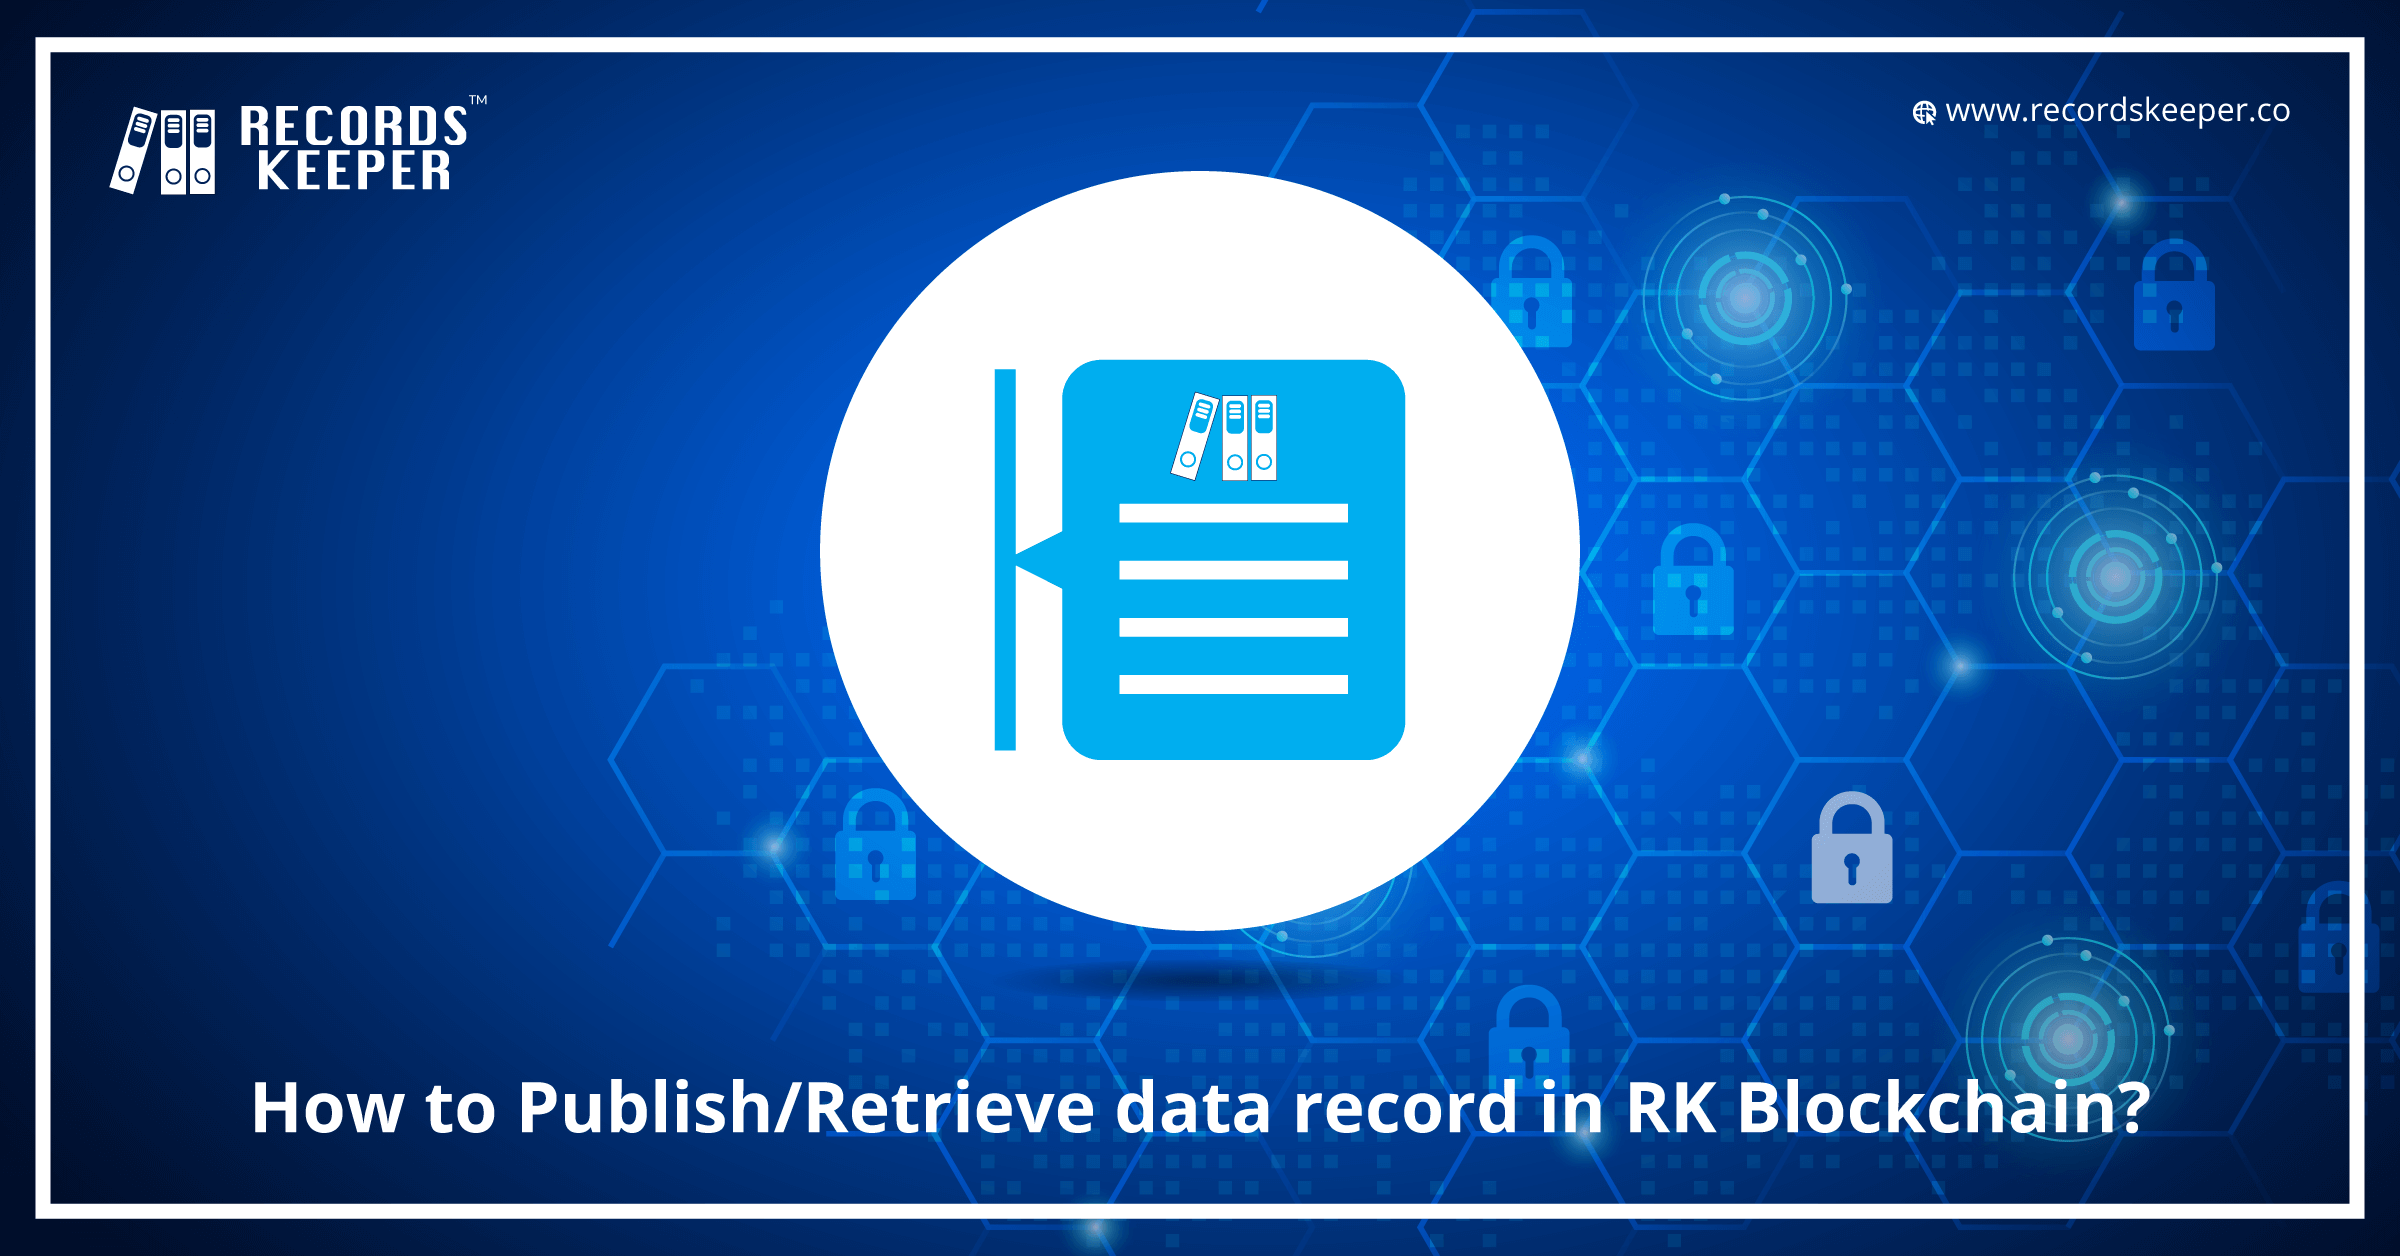 How to Publish/Retrieve data records in RecordsKeeper Blockchain?